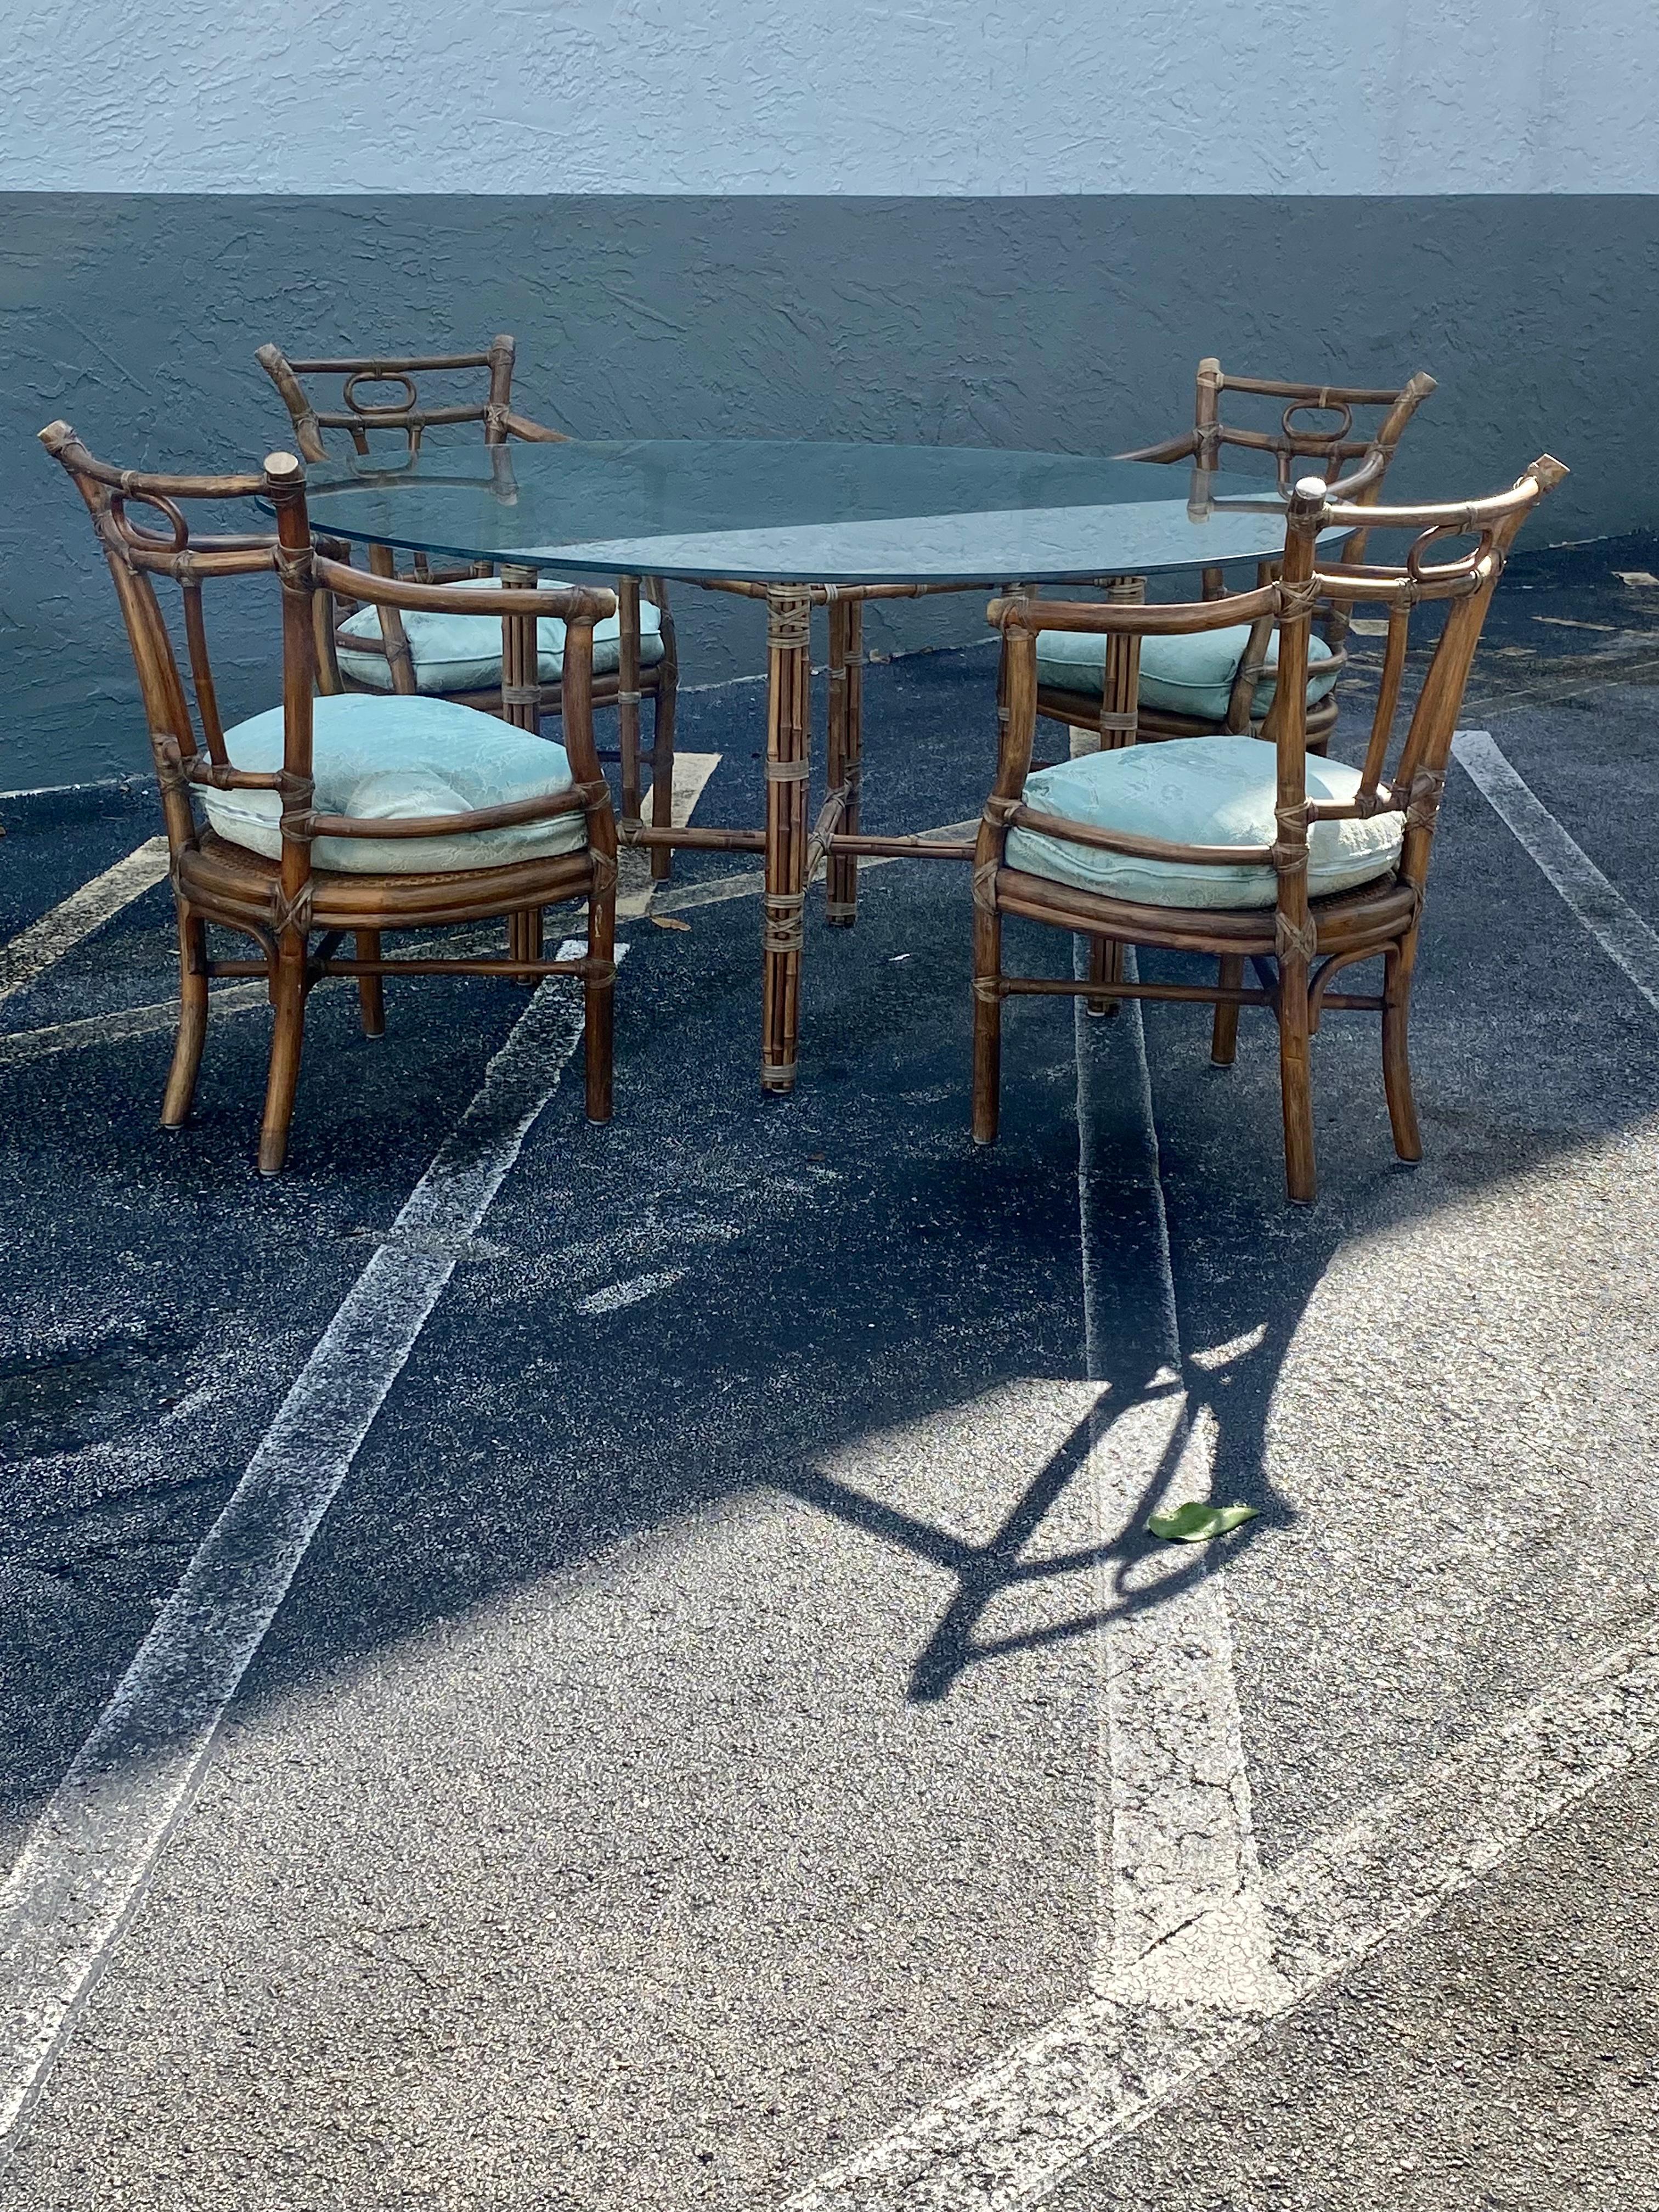 On offer on this occasion is one of the most stunning, dining set you could hope to find. This is an ultra-rare opportunity to acquire what is, unequivocally, the best of the best, it being a most spectacular and beautifully-presented and all